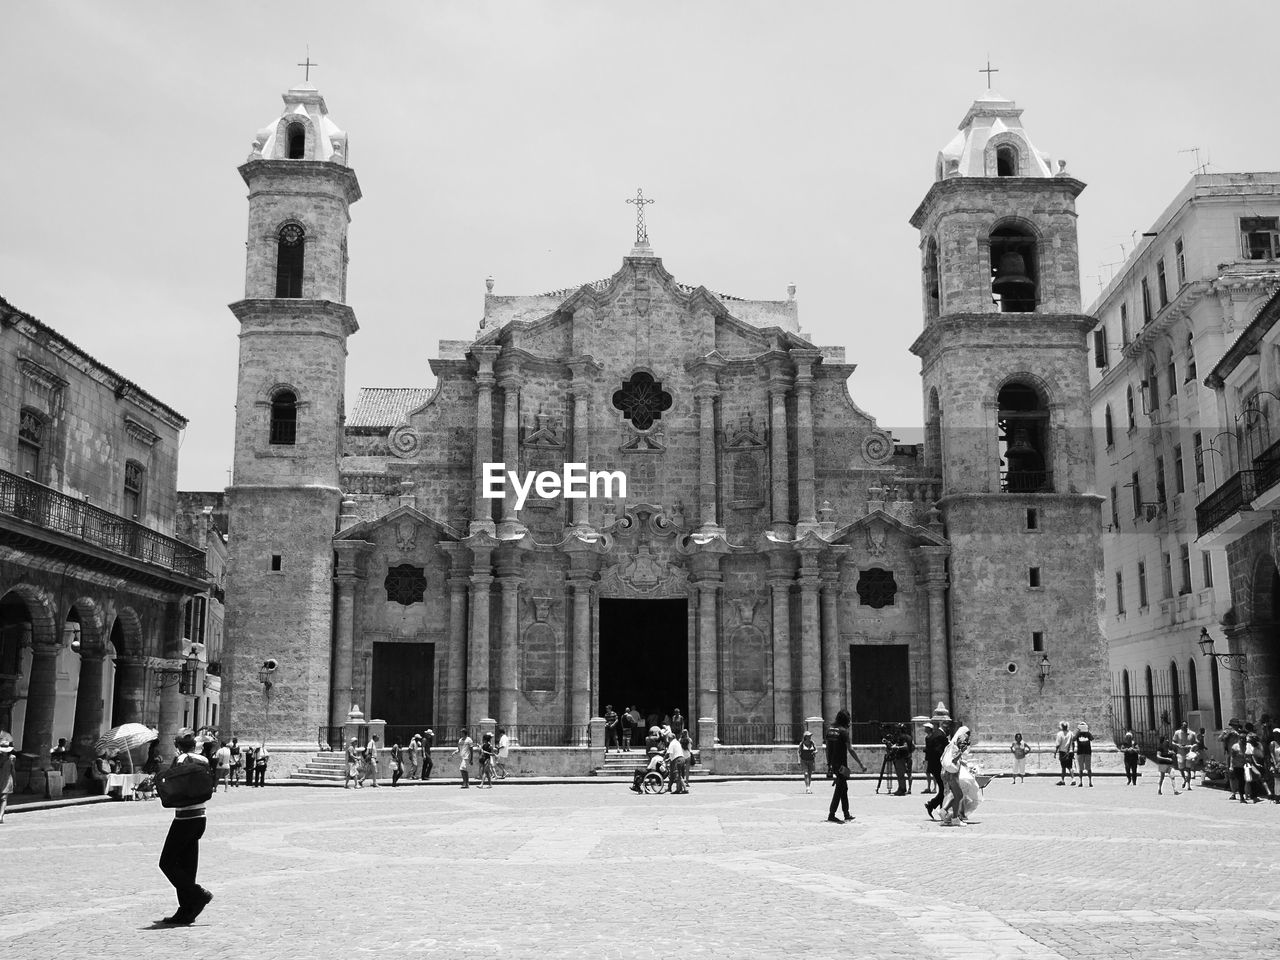 Cathedral of havana